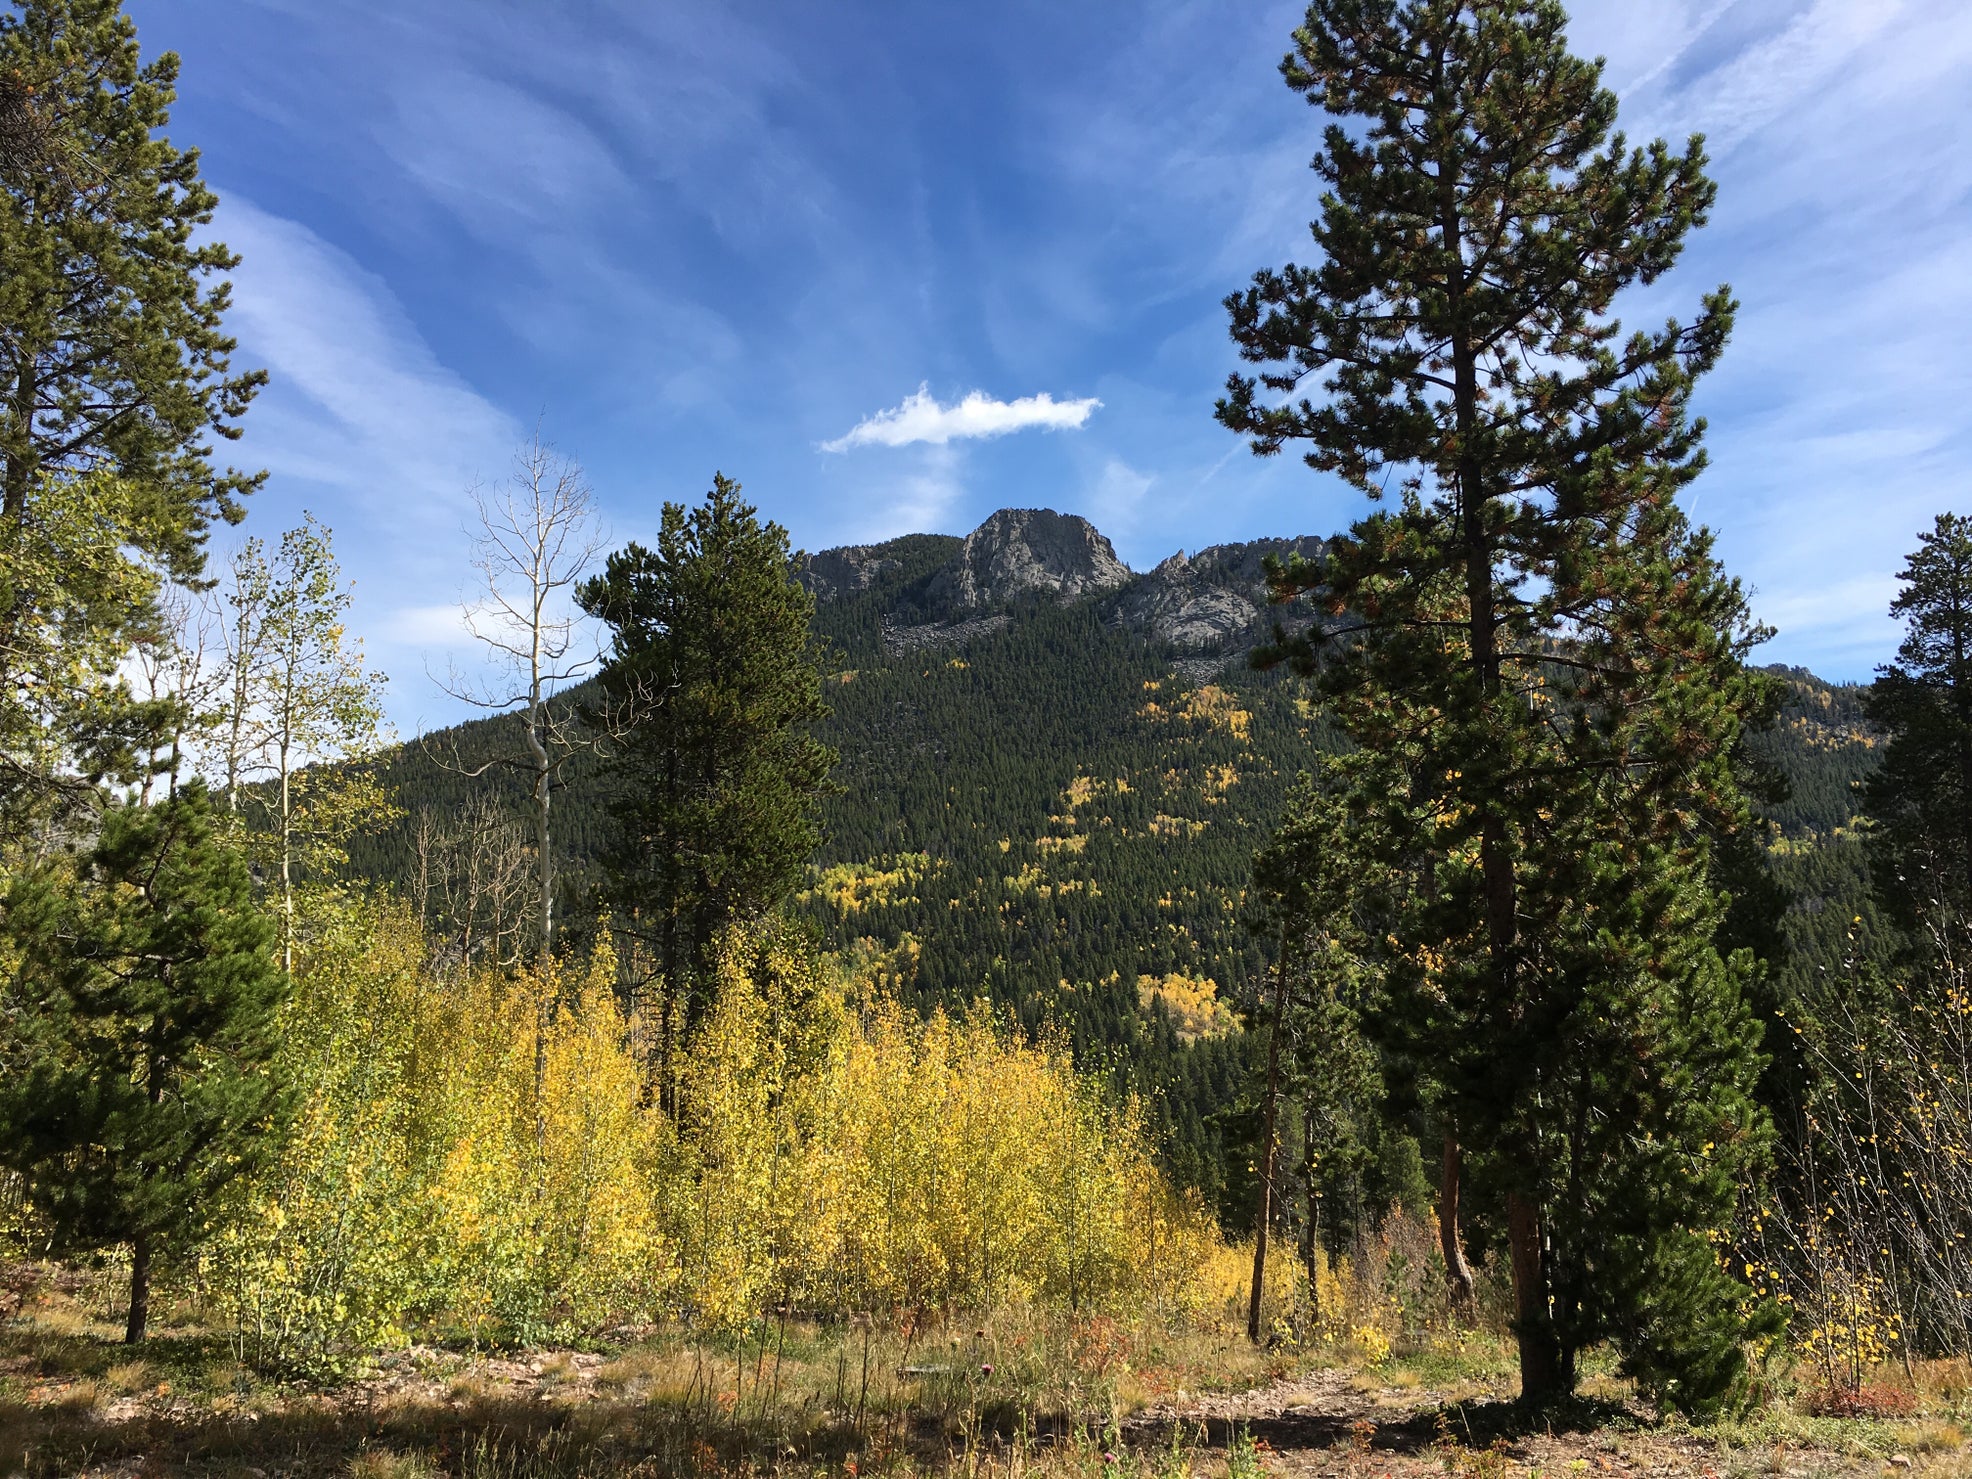 Pike’s Peak mountain formation behind aspen trees at Reverend’s Ridge Campground